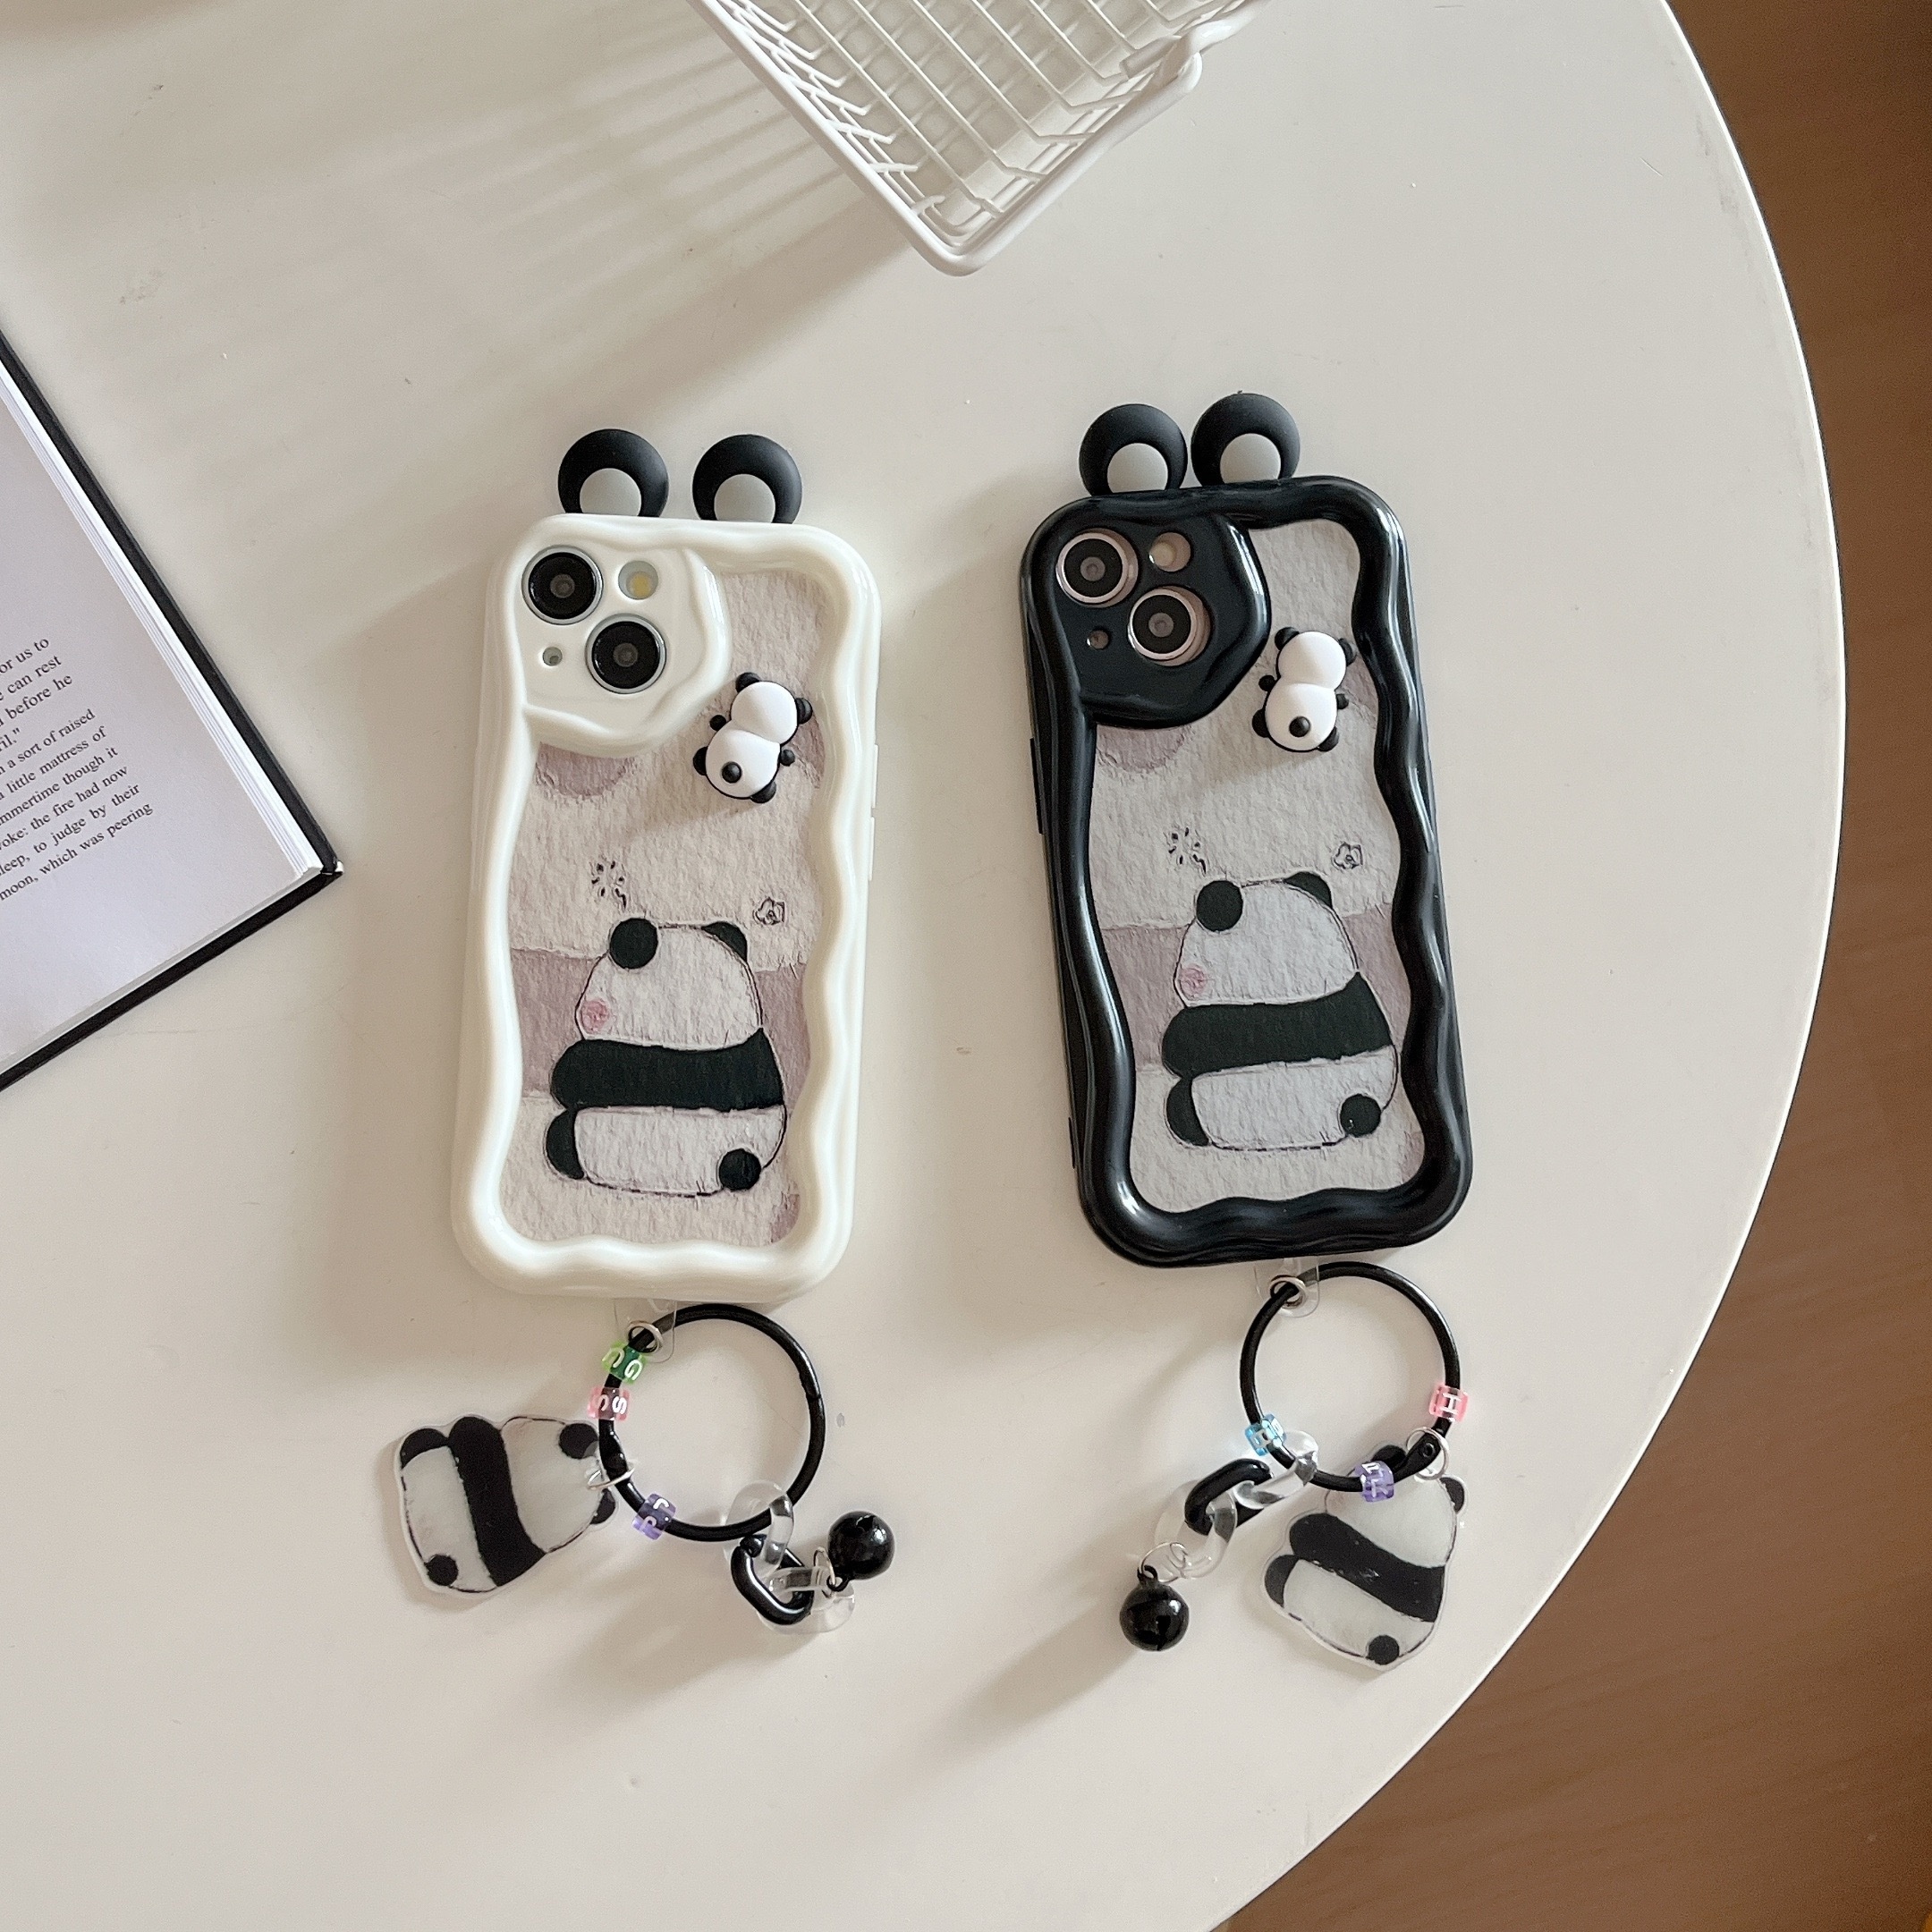 

3d Cartoon Panda Case With Lanyard, Tpu Protective Cover For 7-15 Pro Max, Cute Summer Trendy Shockproof Basic Case With Panda Charm Accessory